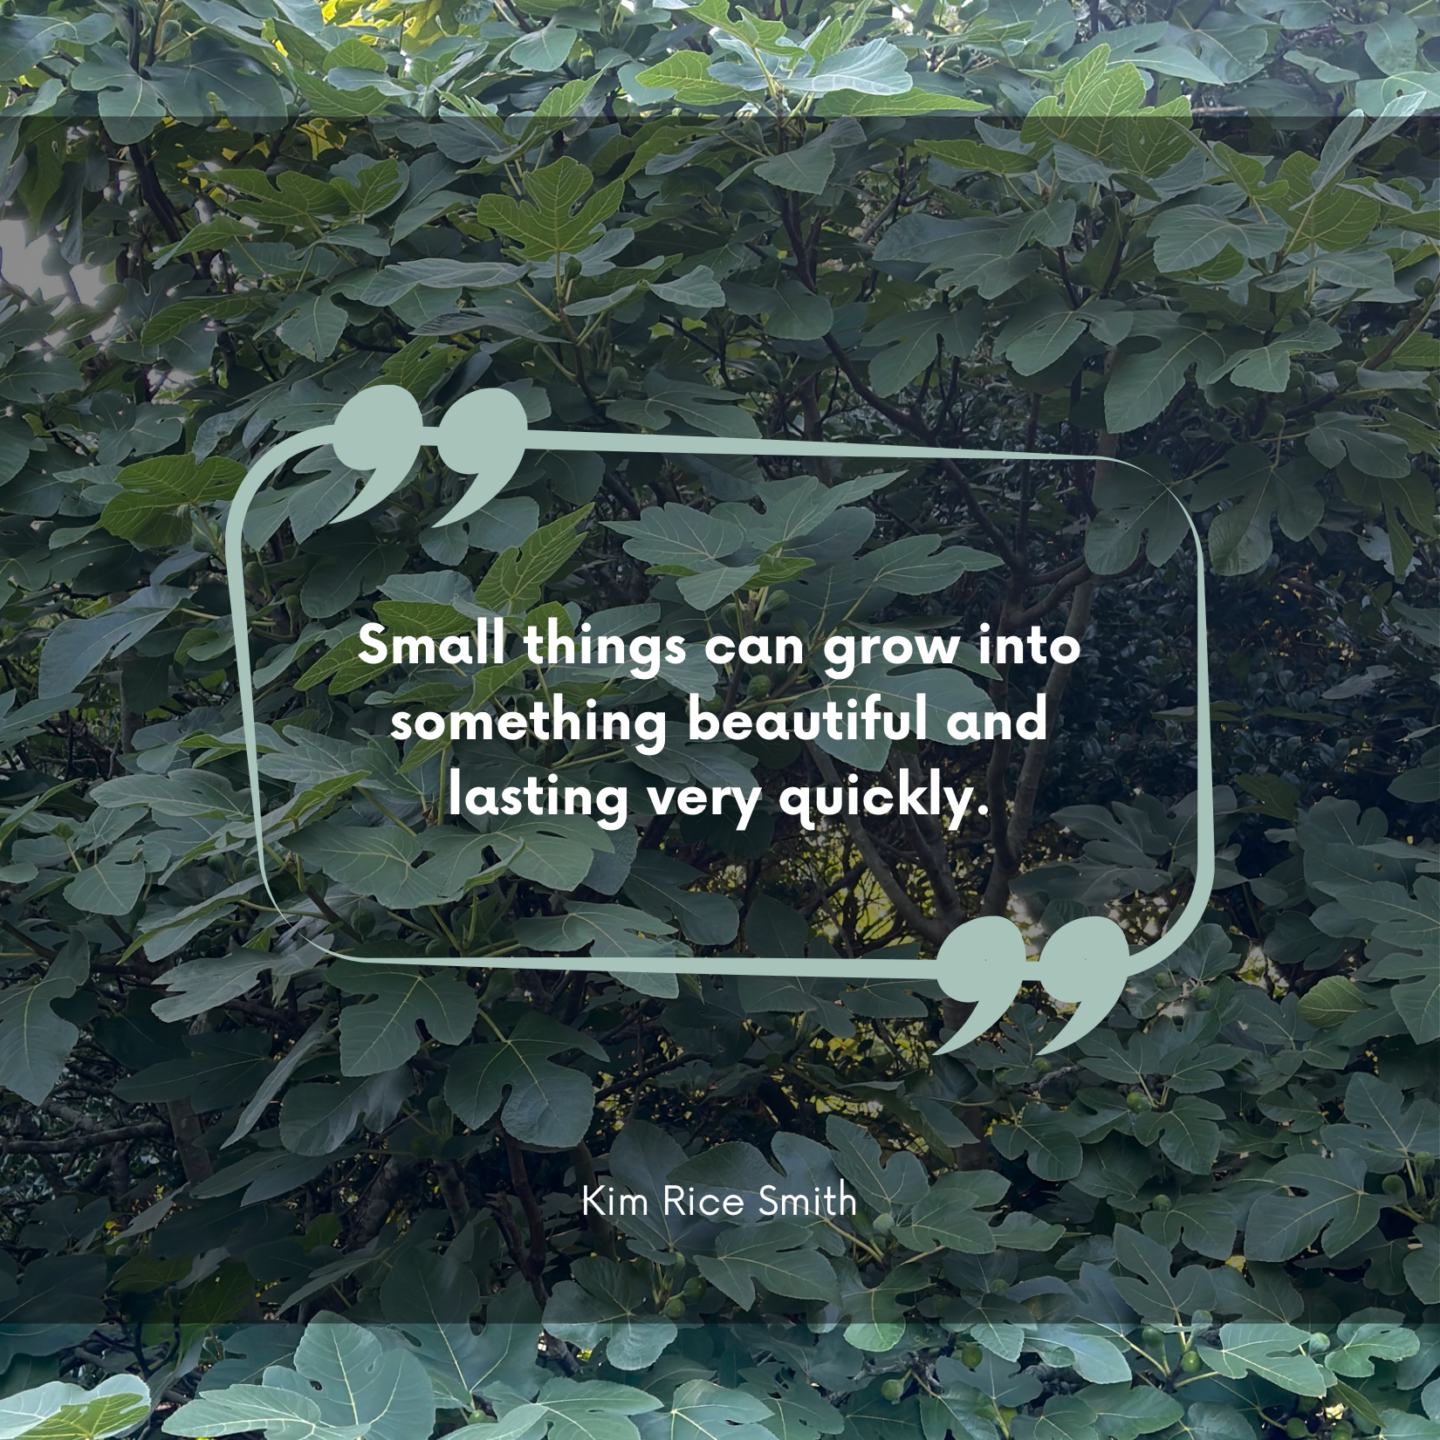 larger version of Small Things quote - Fig Tree pic in background